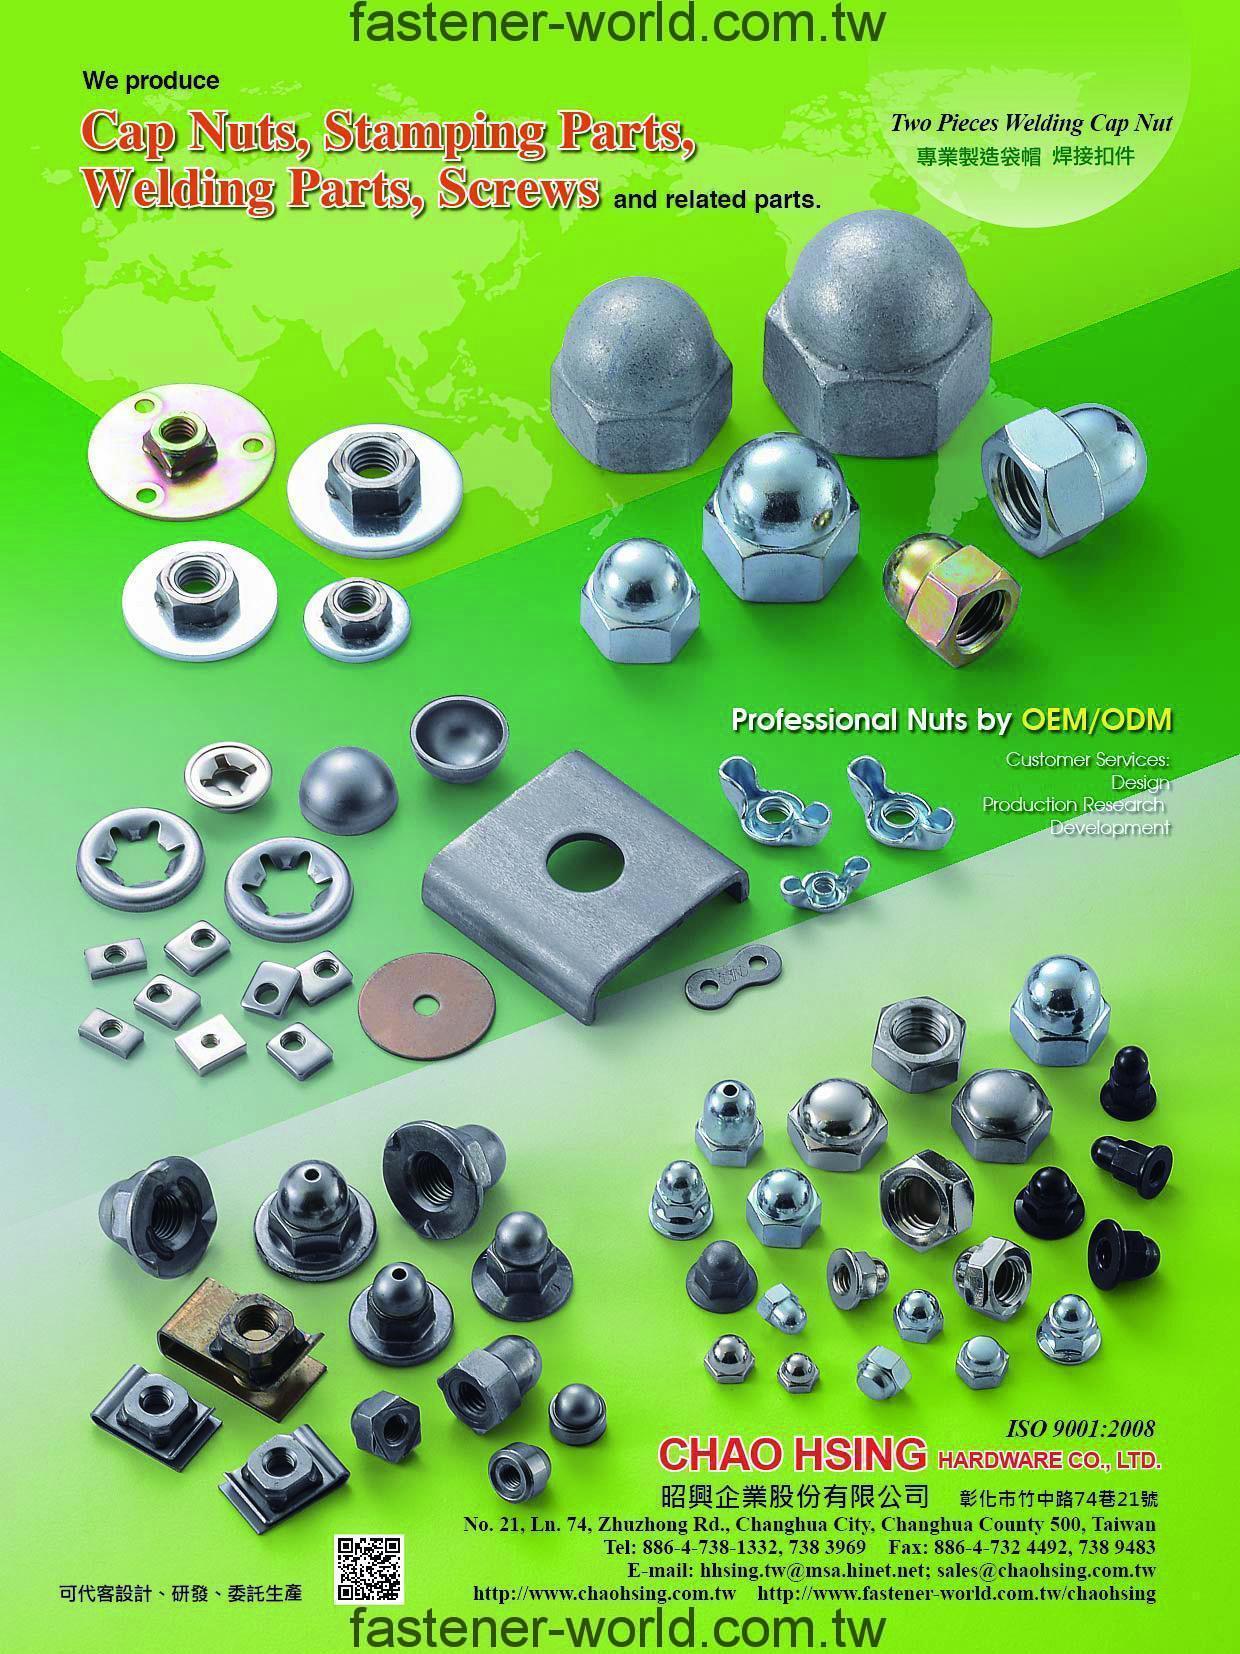 CHAO HSING HARDWARE CO., LTD. _Online Catalogues